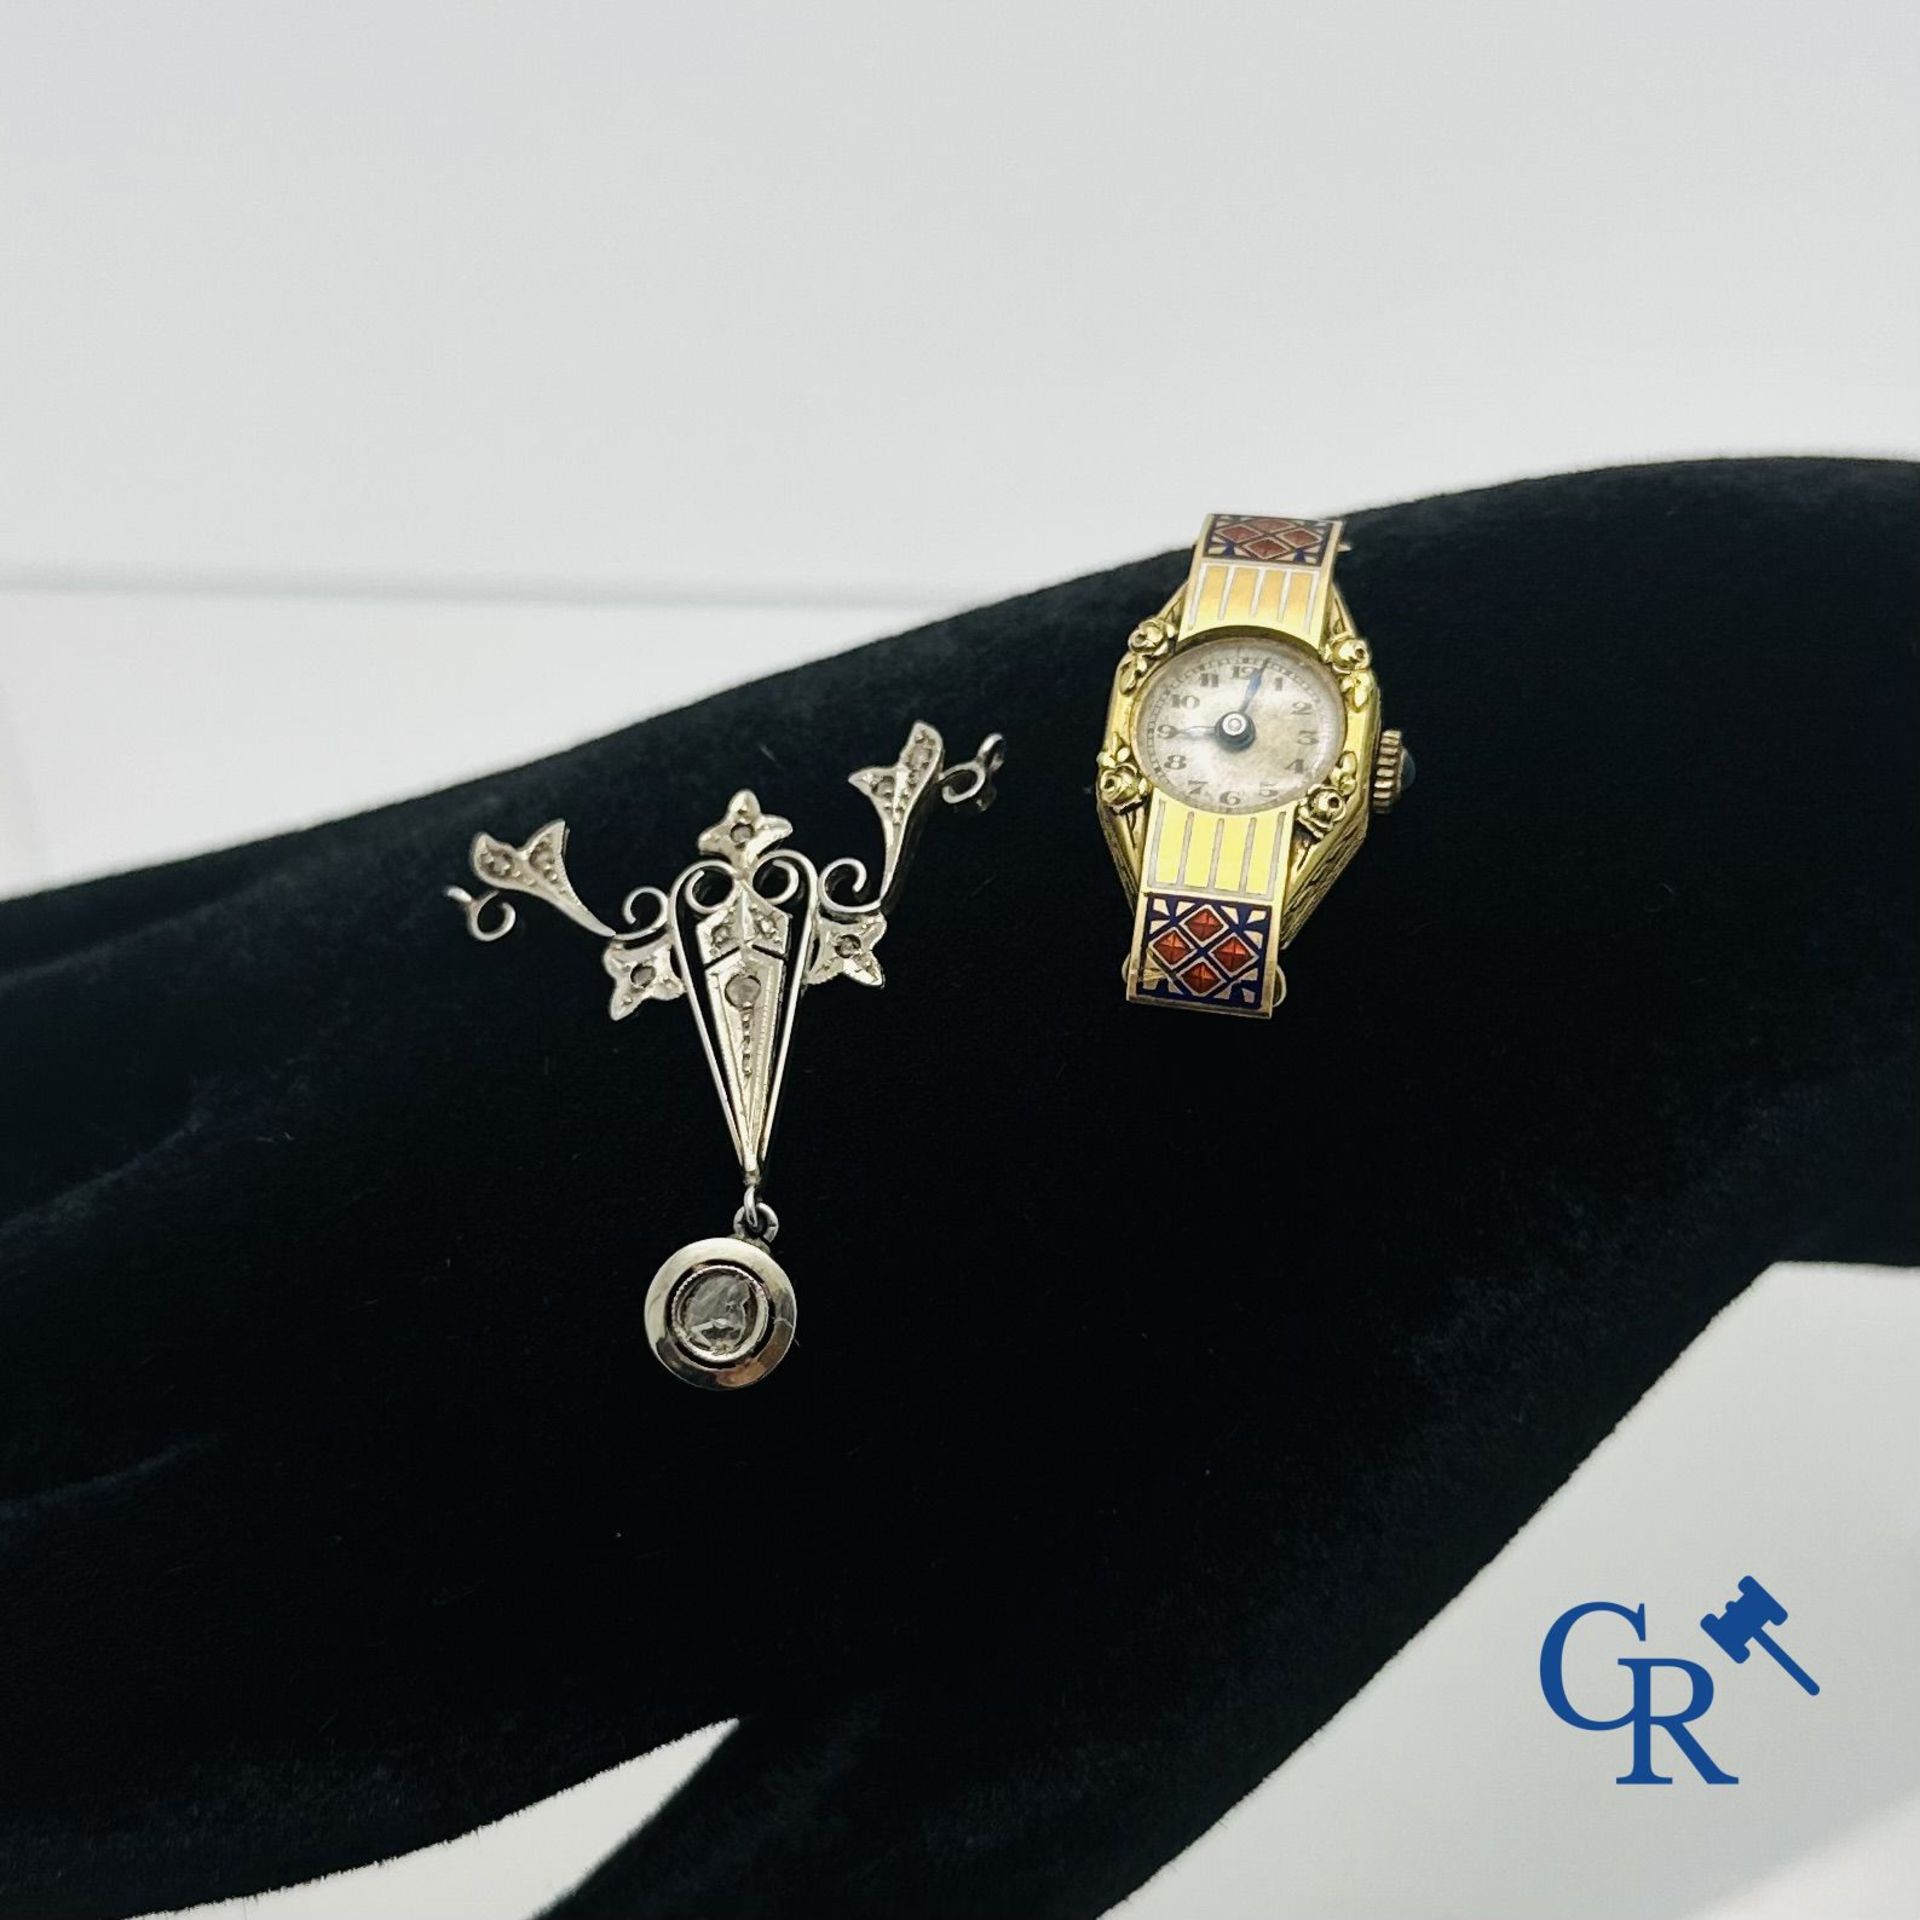 Jewellery: Lot consisting of a pendant in white gold 18K and an Art Deco ladies movement 18K.